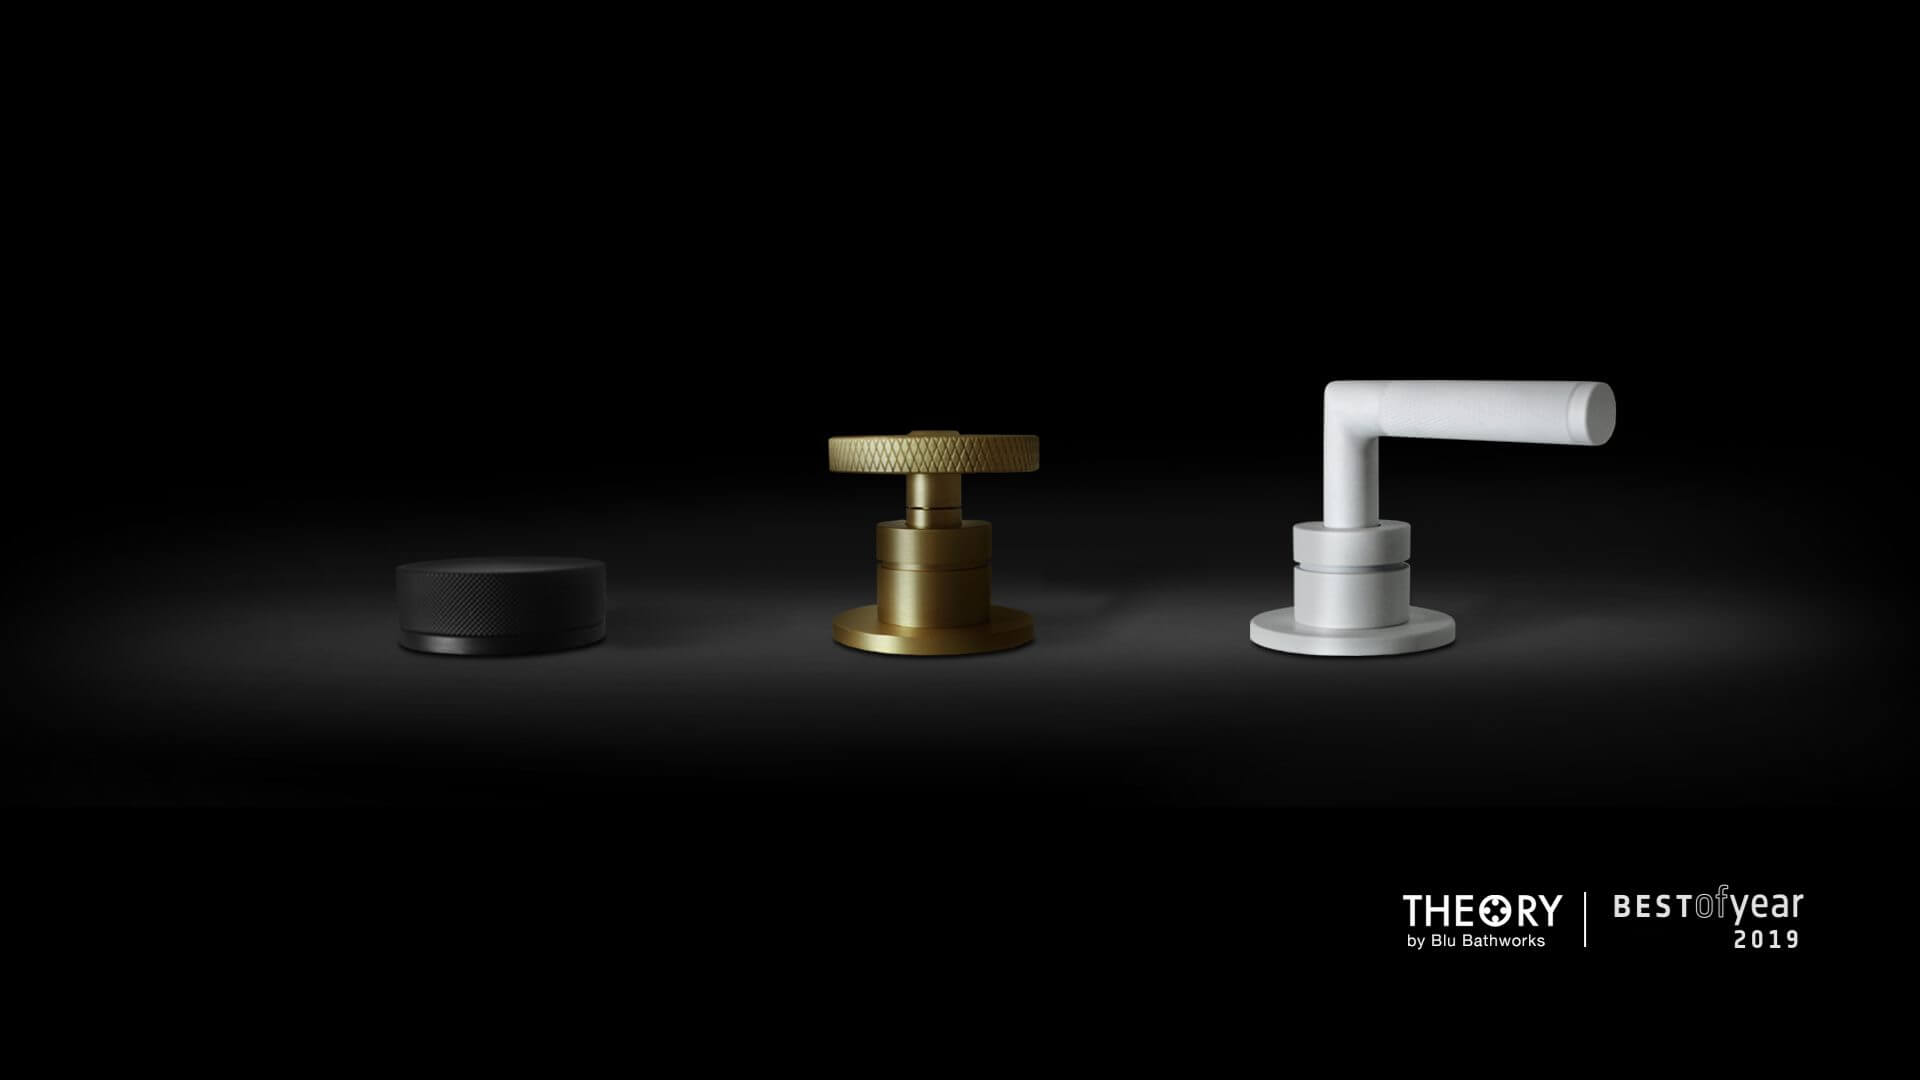 Theory collection of tapware for Interior Design Best of Year Awards 2019! Image